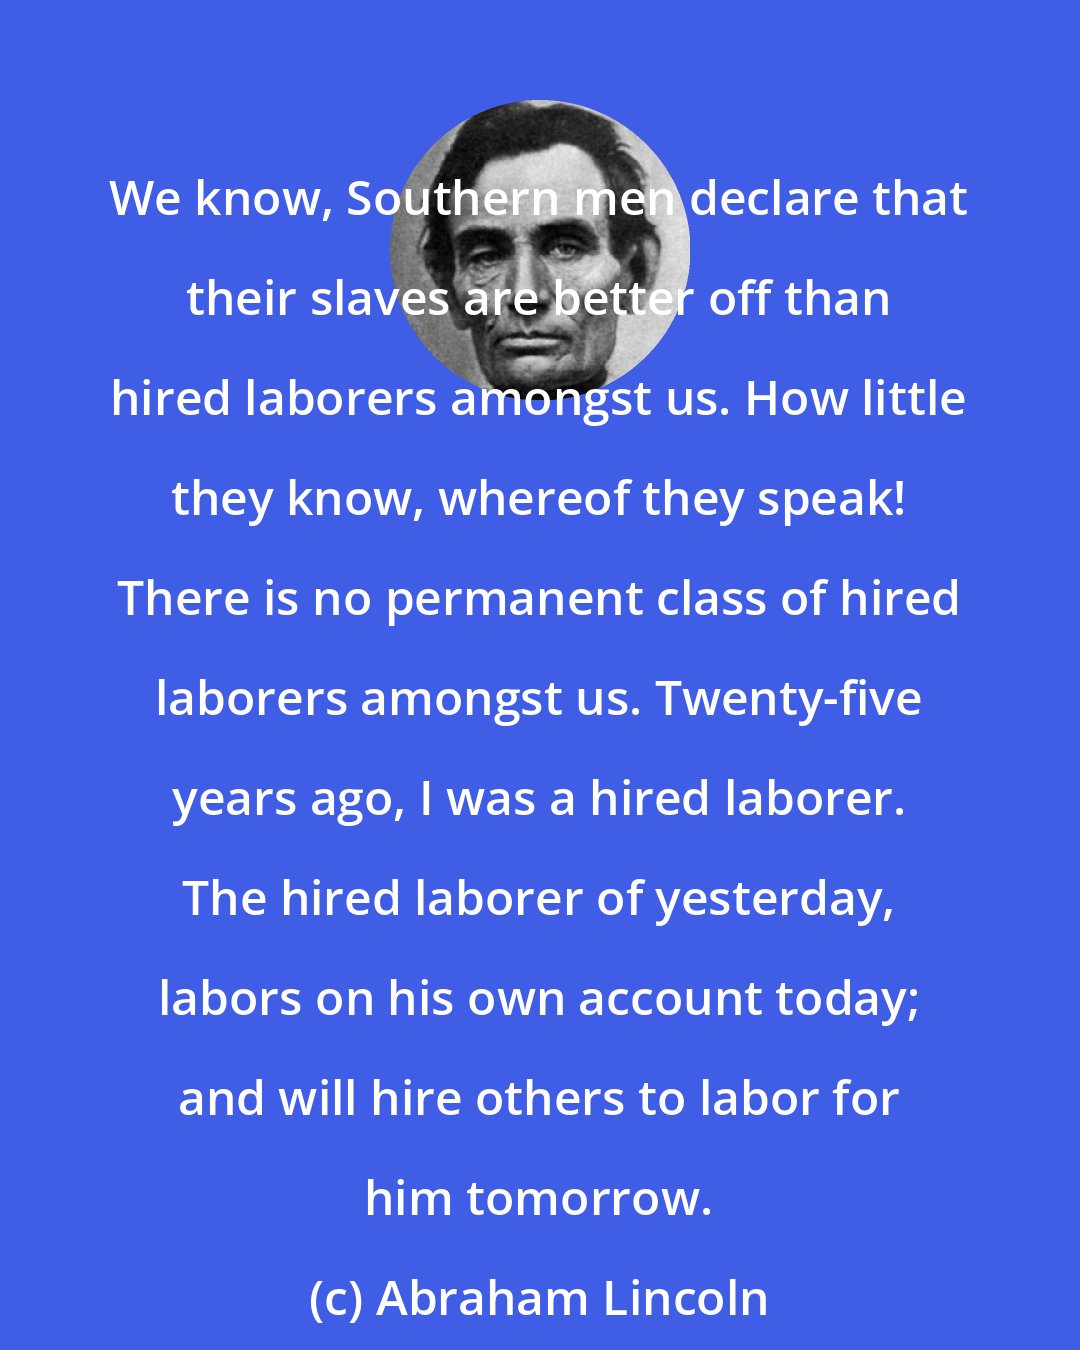 Abraham Lincoln: We know, Southern men declare that their slaves are better off than hired laborers amongst us. How little they know, whereof they speak! There is no permanent class of hired laborers amongst us. Twenty-five years ago, I was a hired laborer. The hired laborer of yesterday, labors on his own account today; and will hire others to labor for him tomorrow.